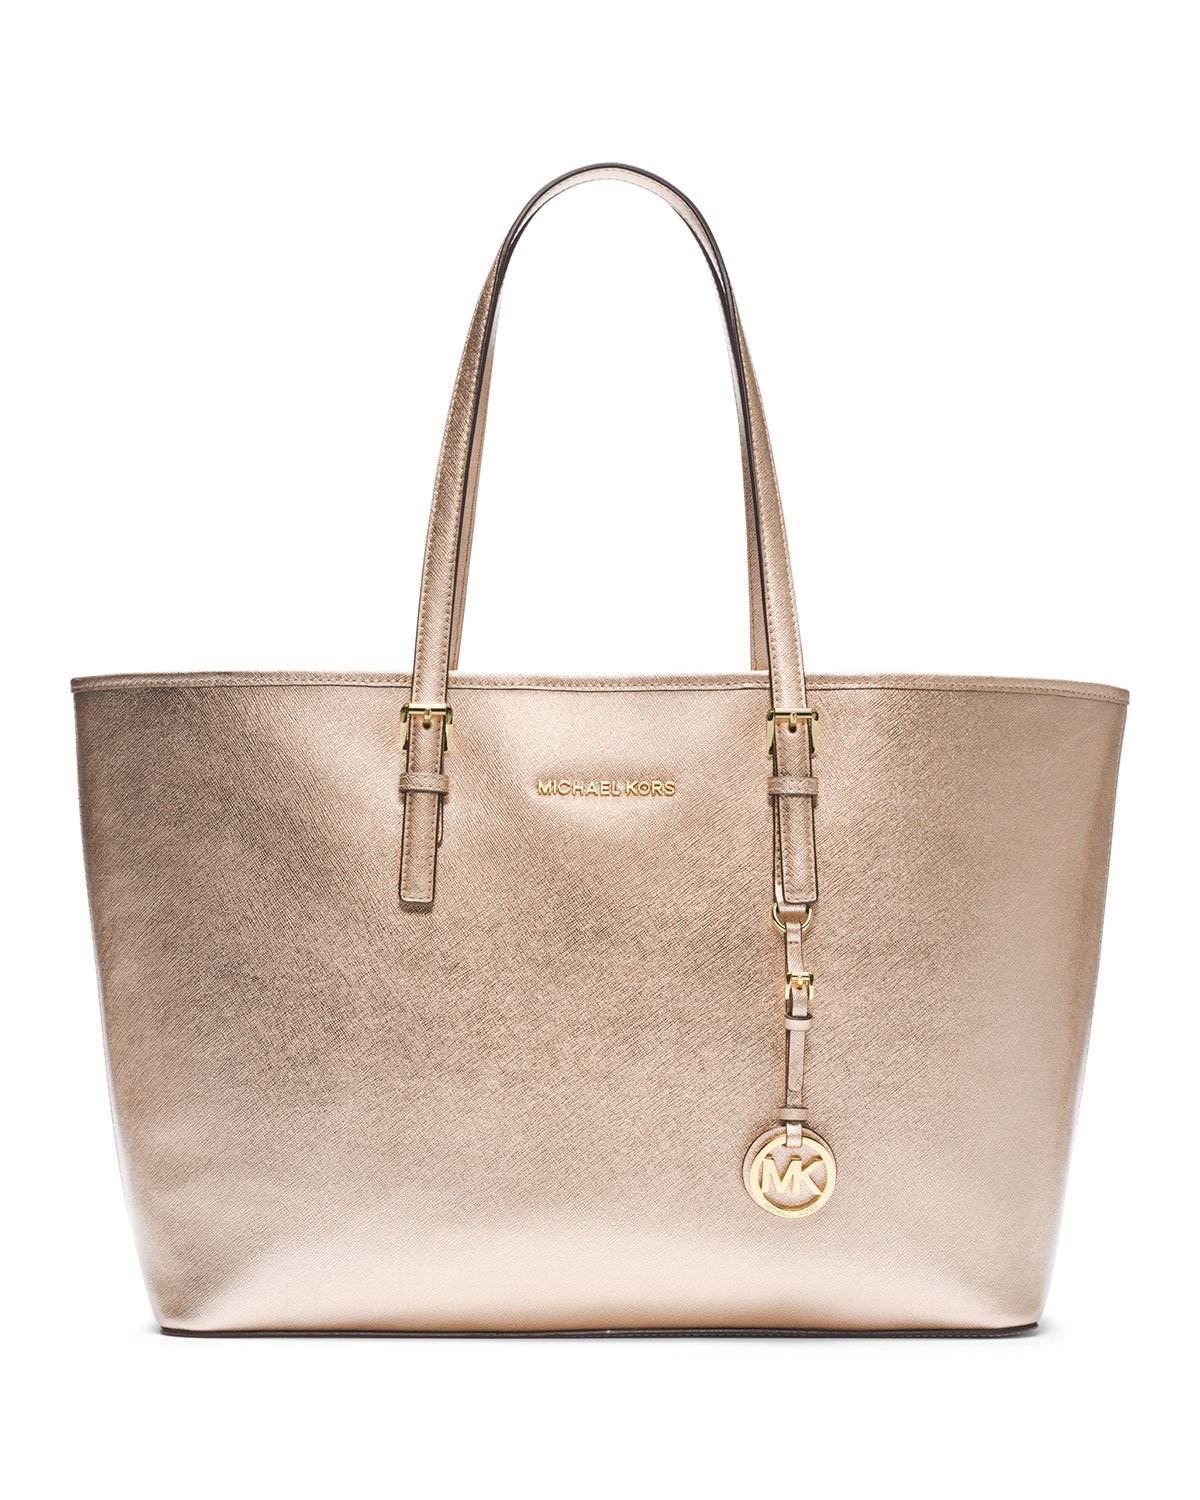 Michael By Michael Kors Medium Jet Set Travel Tote in Gold (PALE GOLD